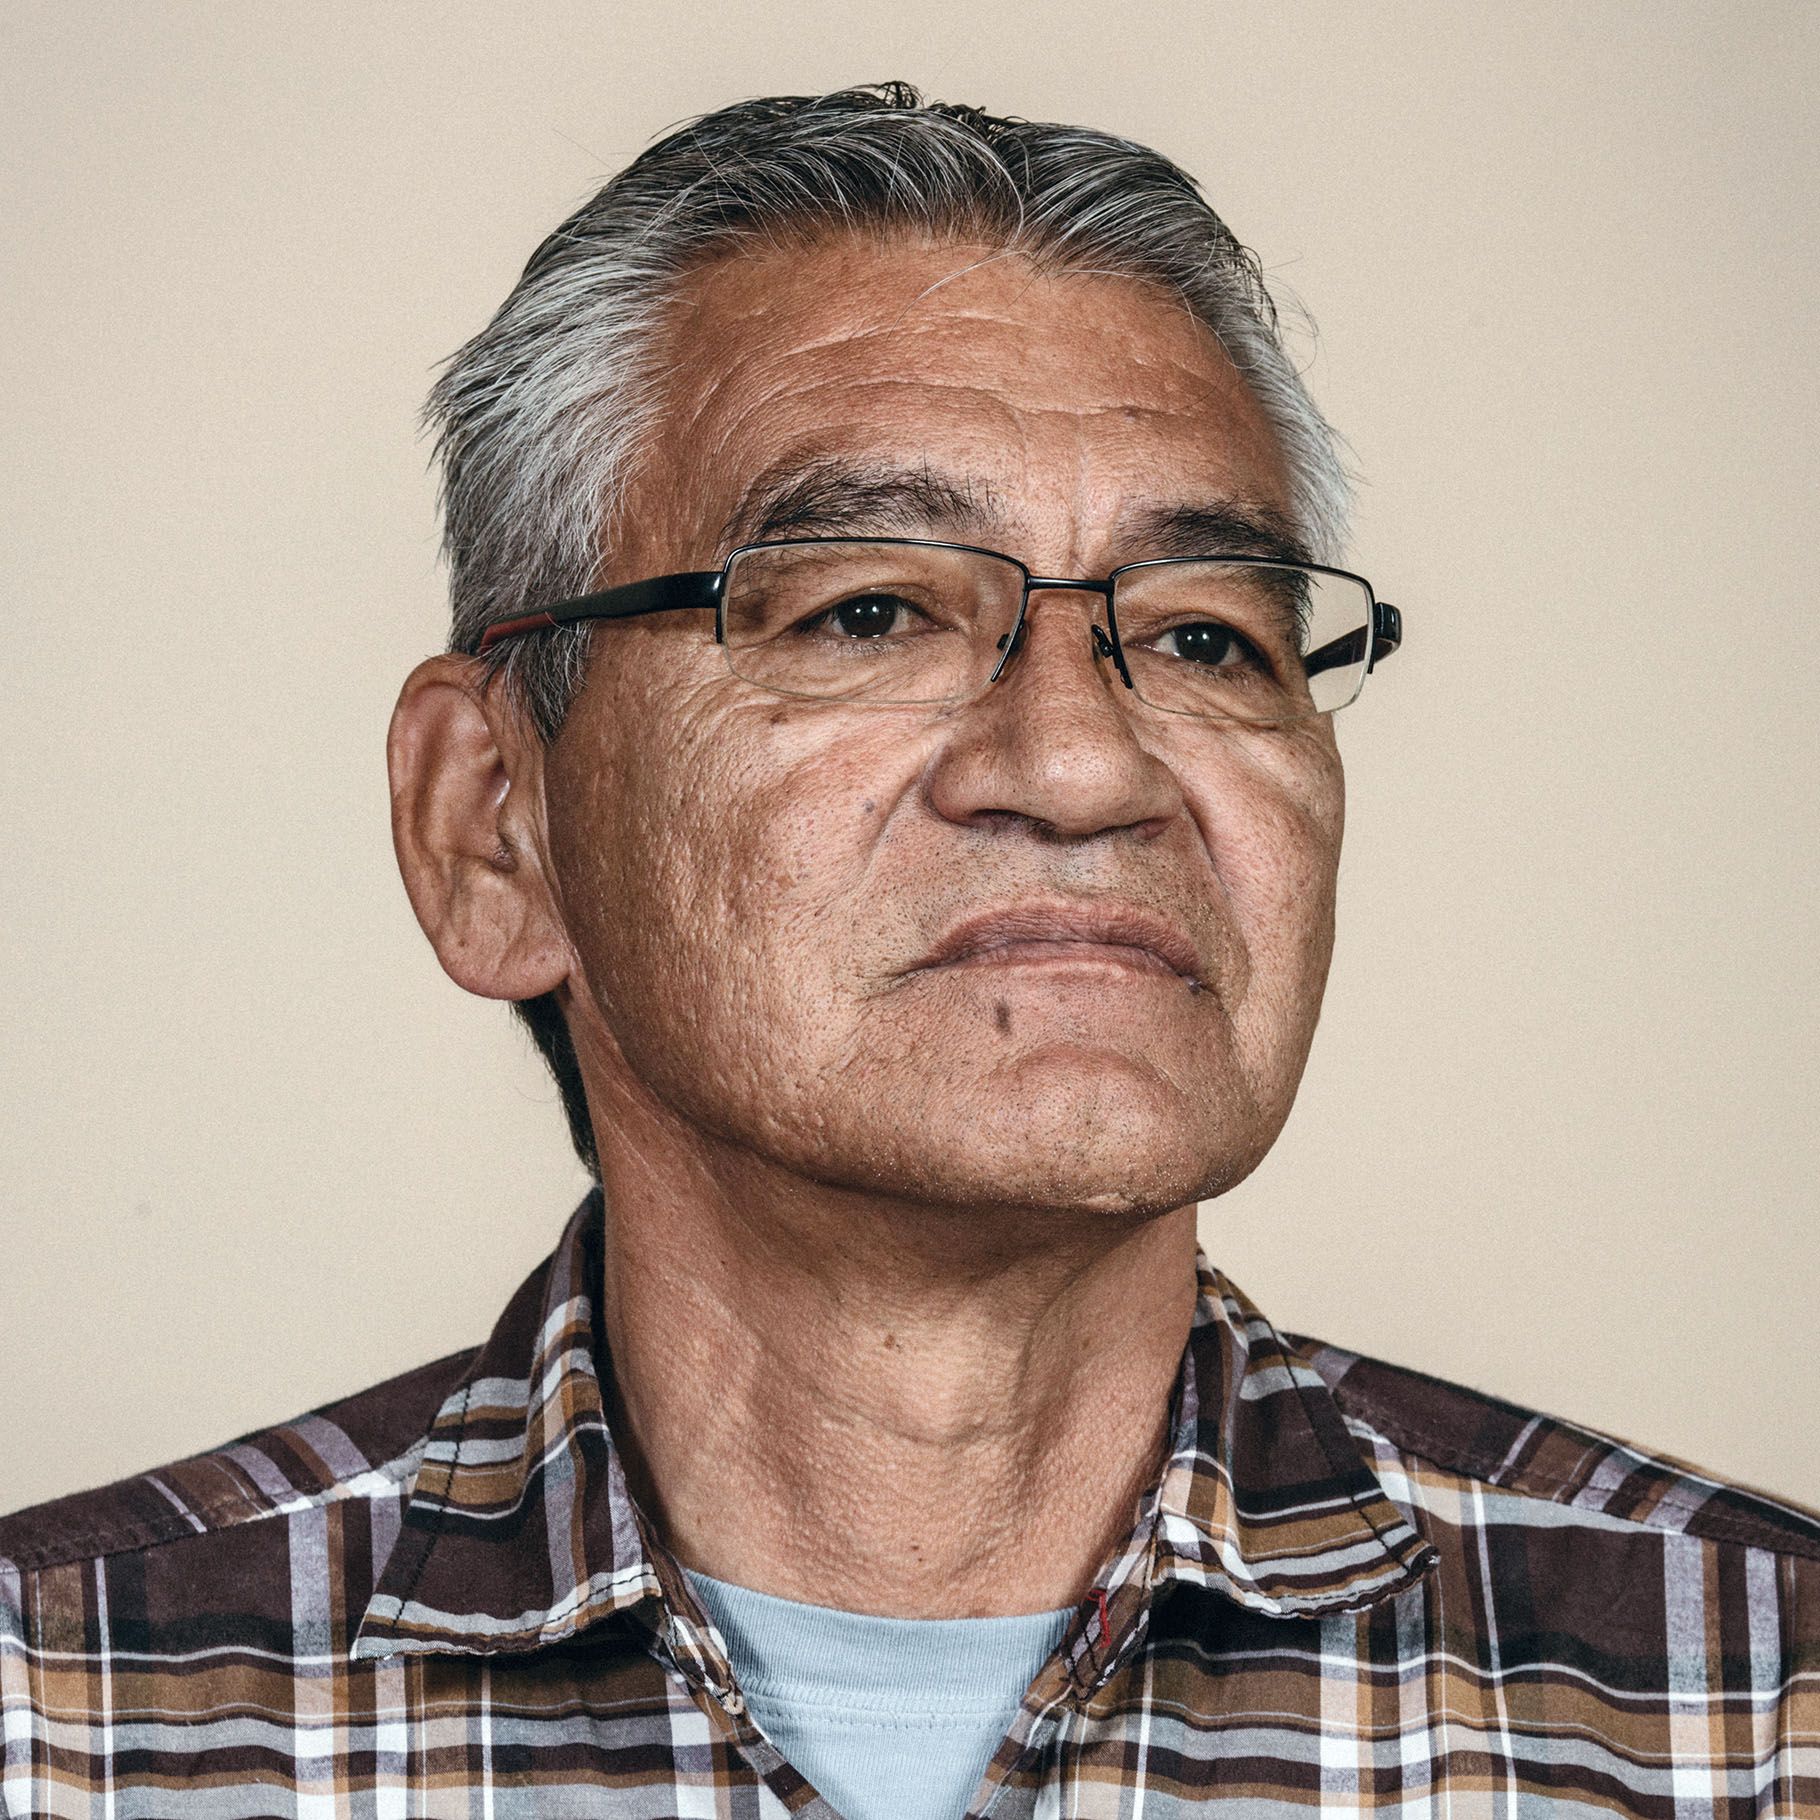 Chief John Ridsdale of the Wetsuweten, one of the groups that fought the British Columbia government over control of local resources, in May 2016. Image by Jim McAuley. Canada, 2016.